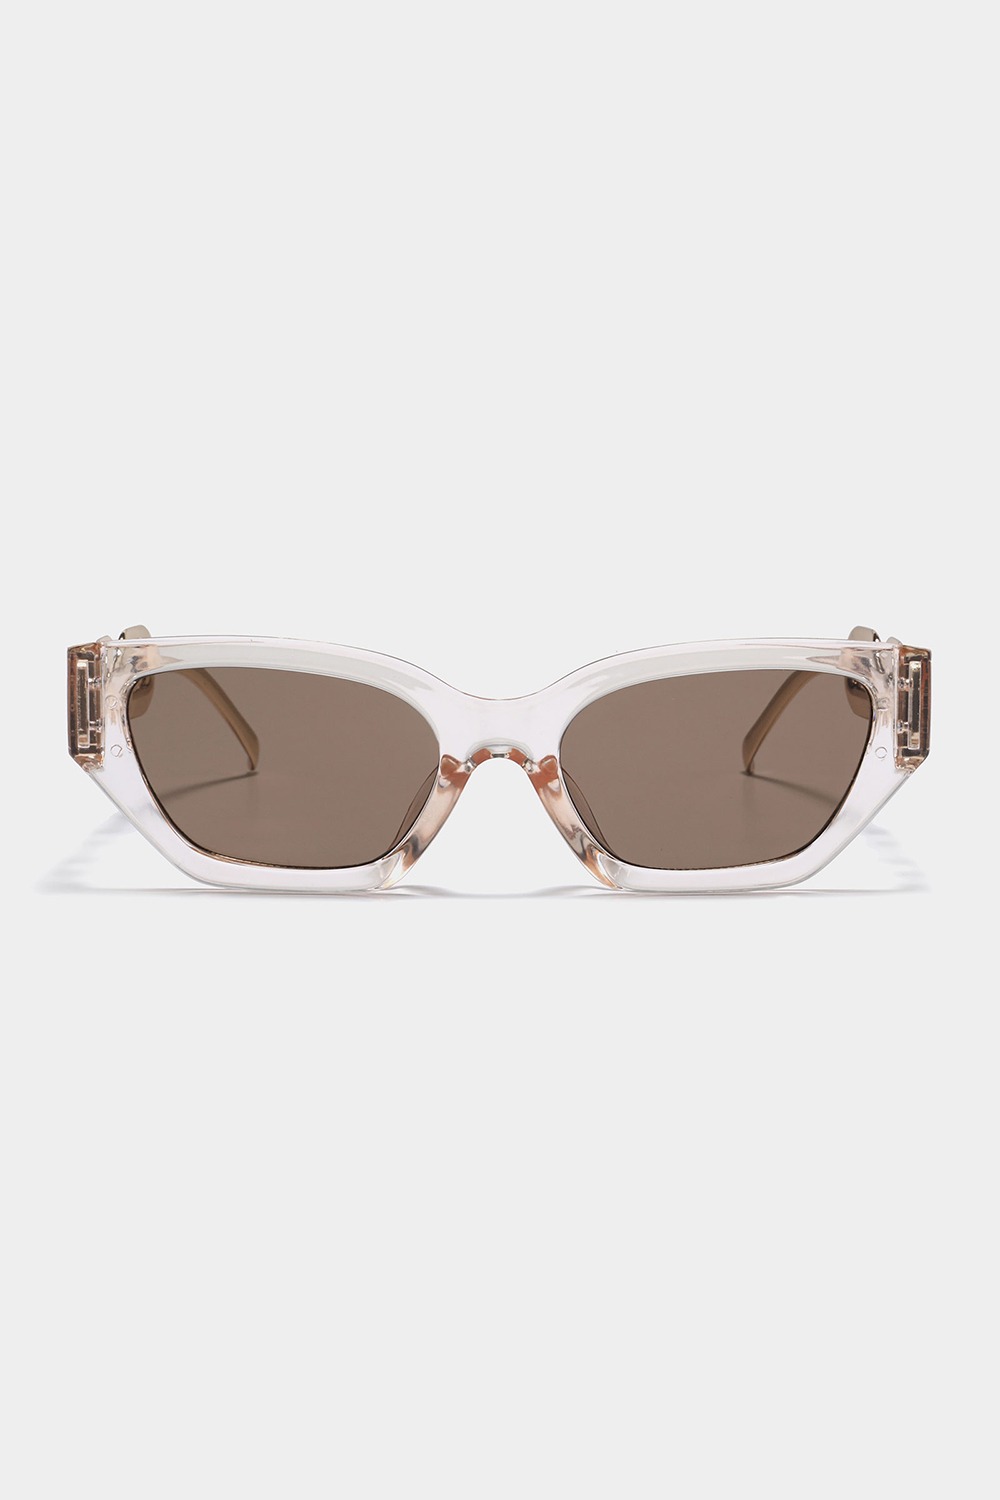 Queen HE9530 Champagne/Brown